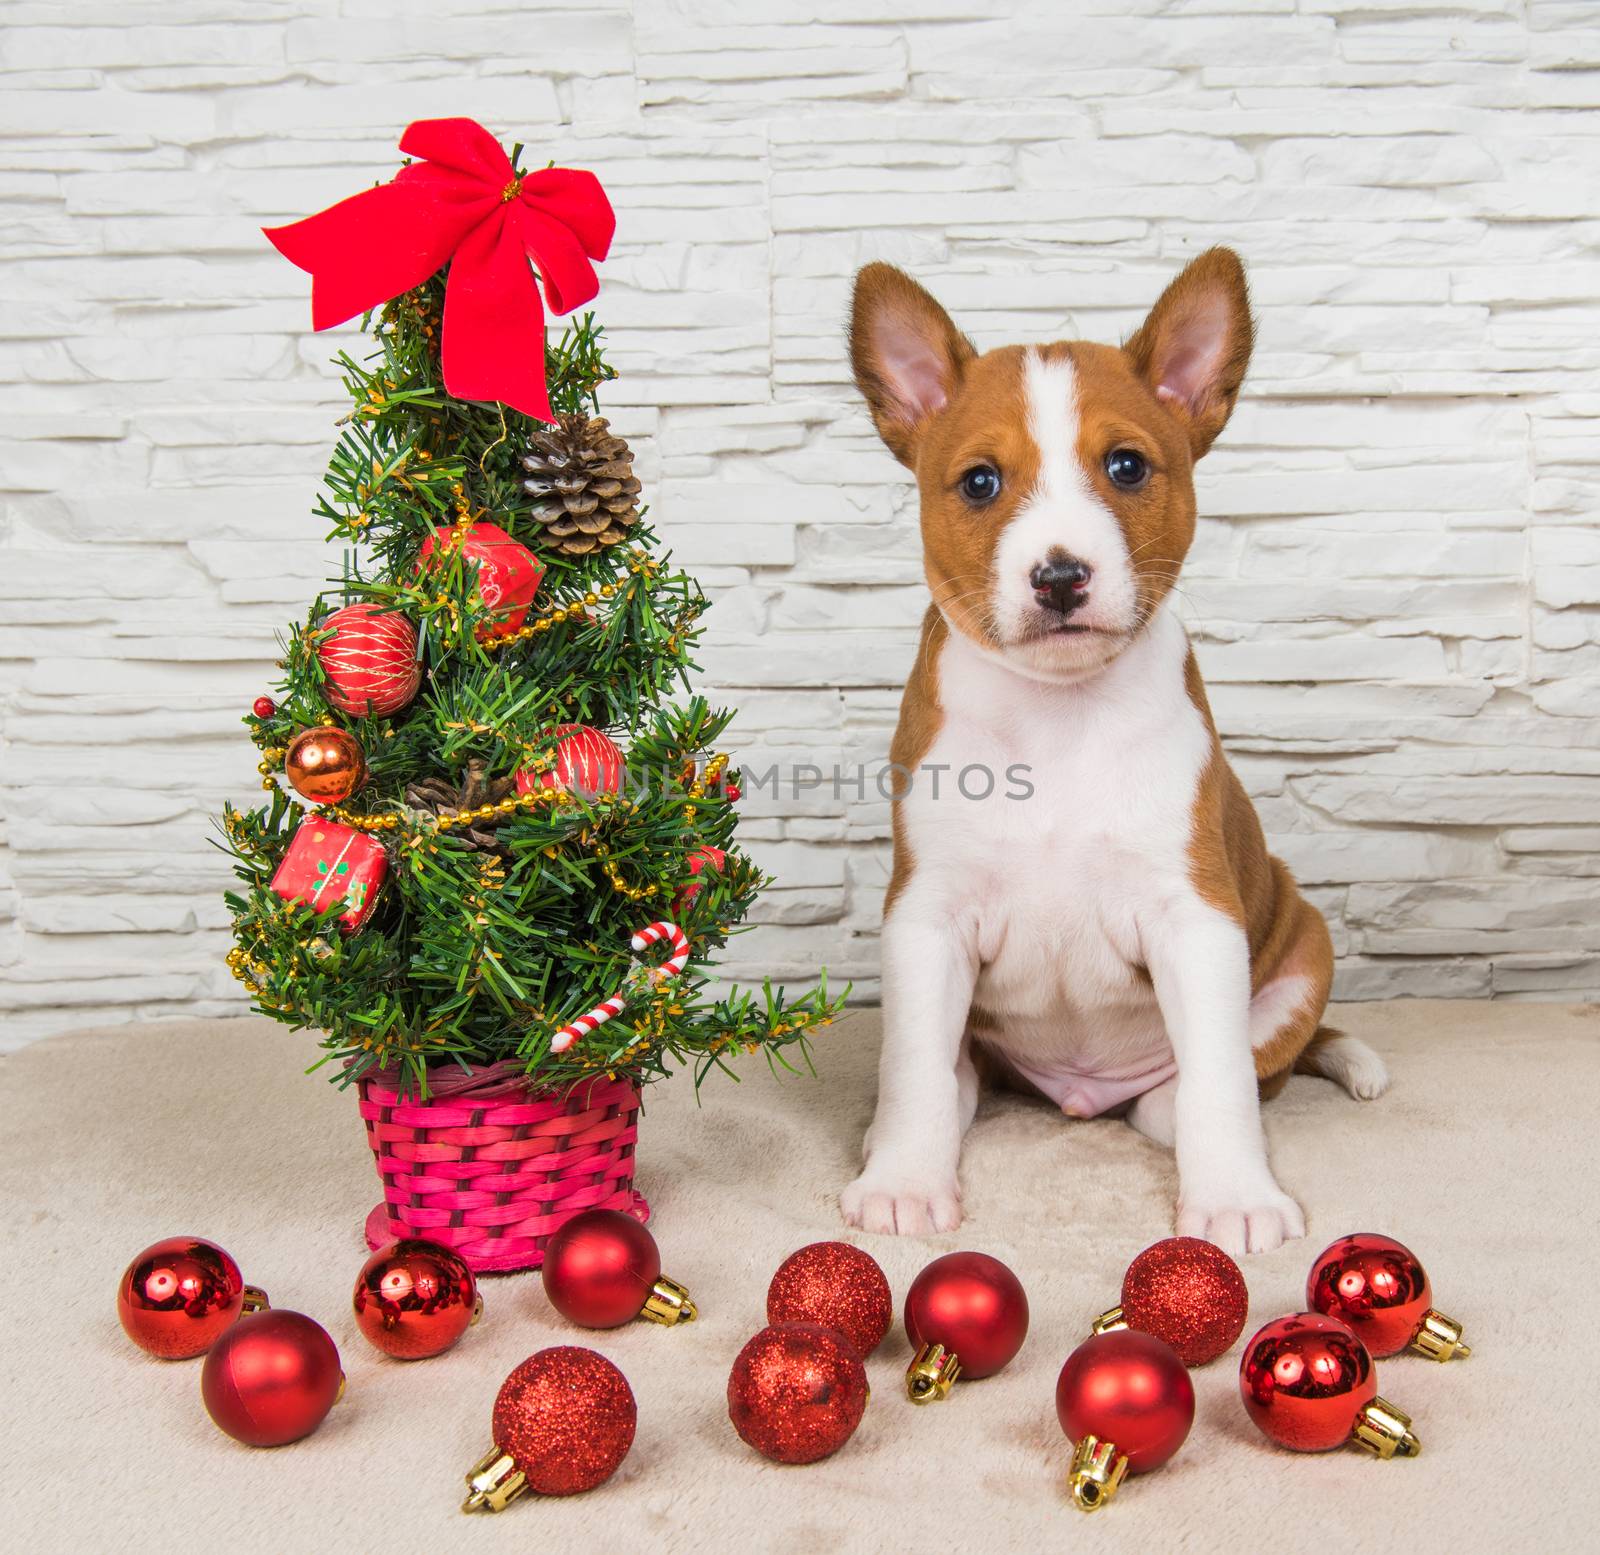 Funny Basenji puppy dog with New Year, Christmas fir tree with gifts